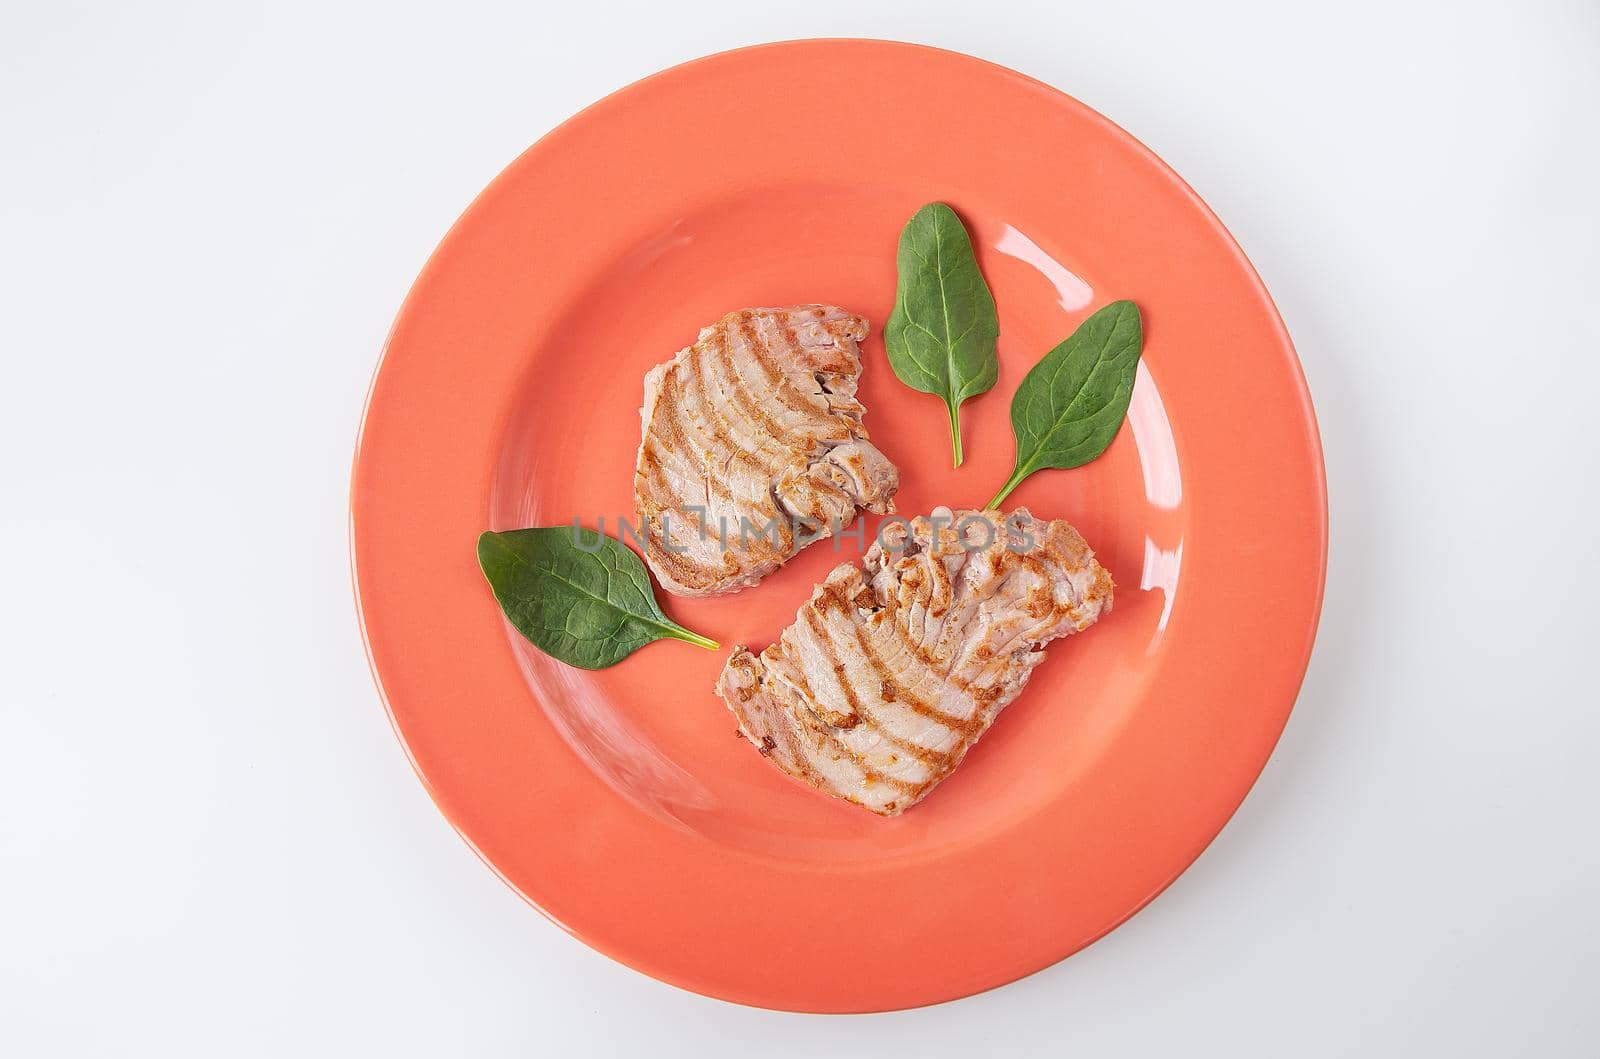 Close-up of a juicy delicious grilled tuna steak on a bright plate. Delicious and healthy food, proper nutrition